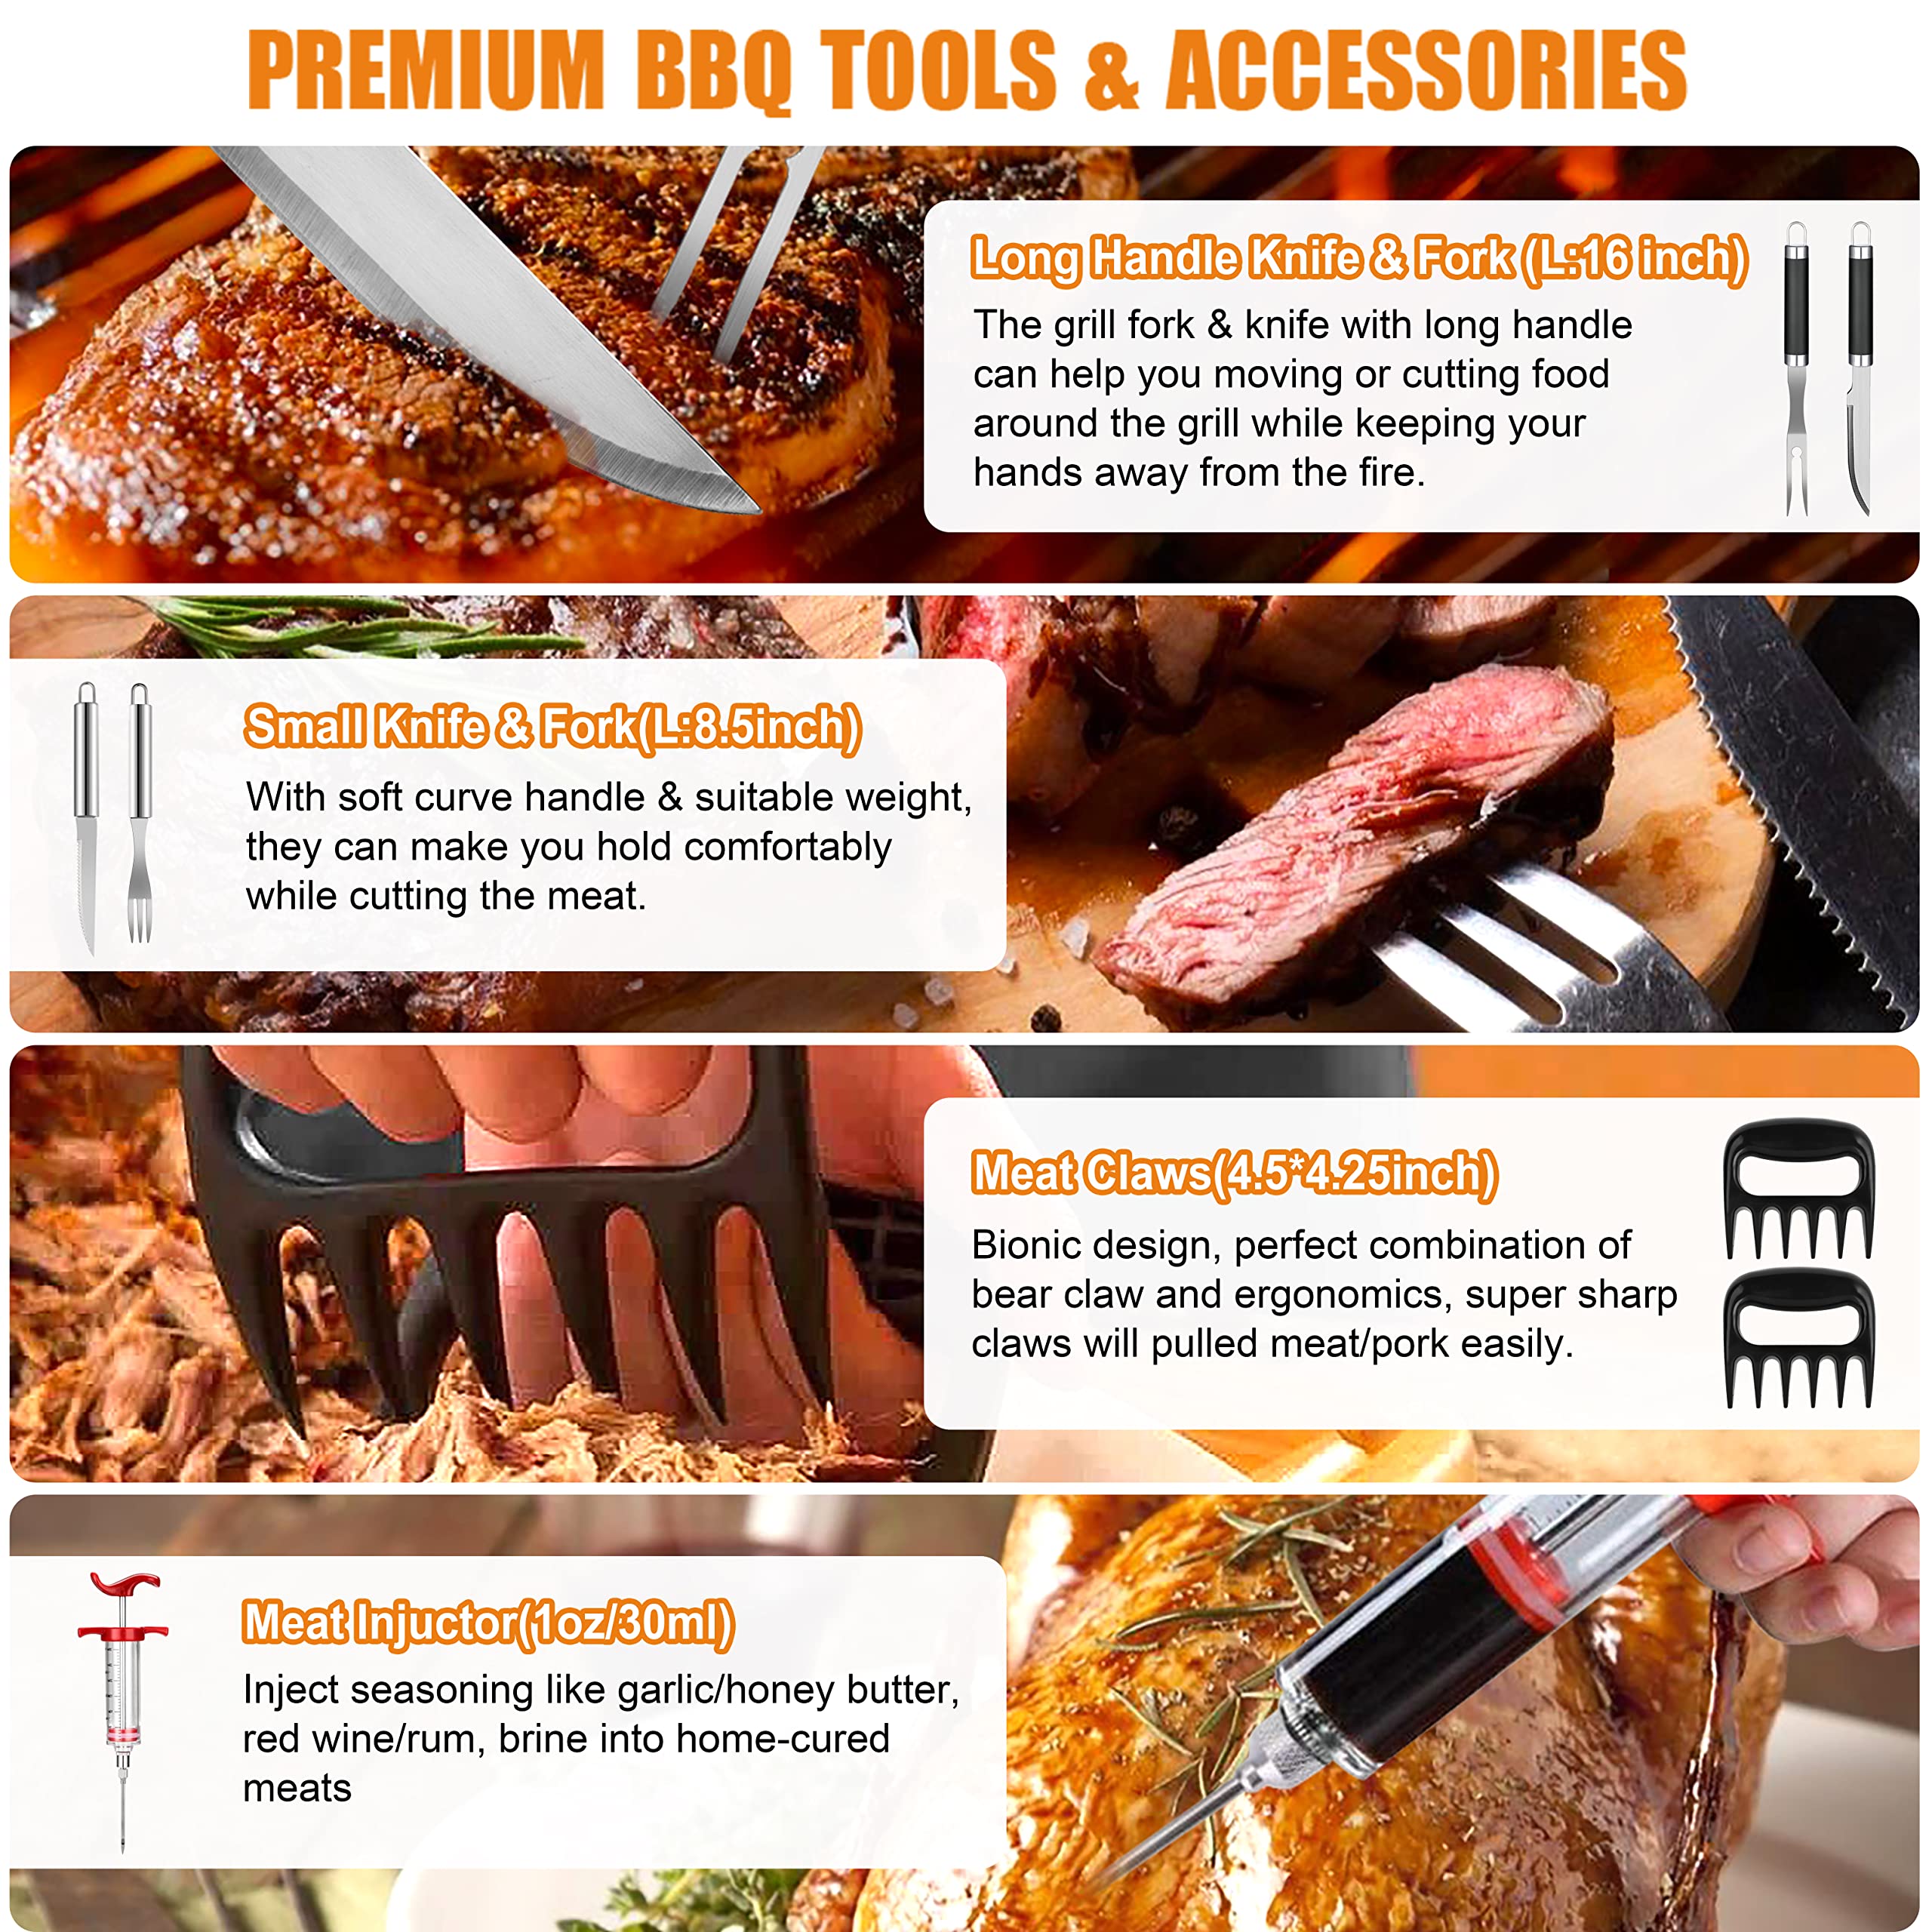 BBQ Grill Accessories Set, 38Pcs Stainless Steel Grill Tools Grilling Accessories with Aluminum Case, Thermometer, Grill Mats for Camping/Backyard Barbecue, Grill Utensils Set for Men Women - image 2 of 7